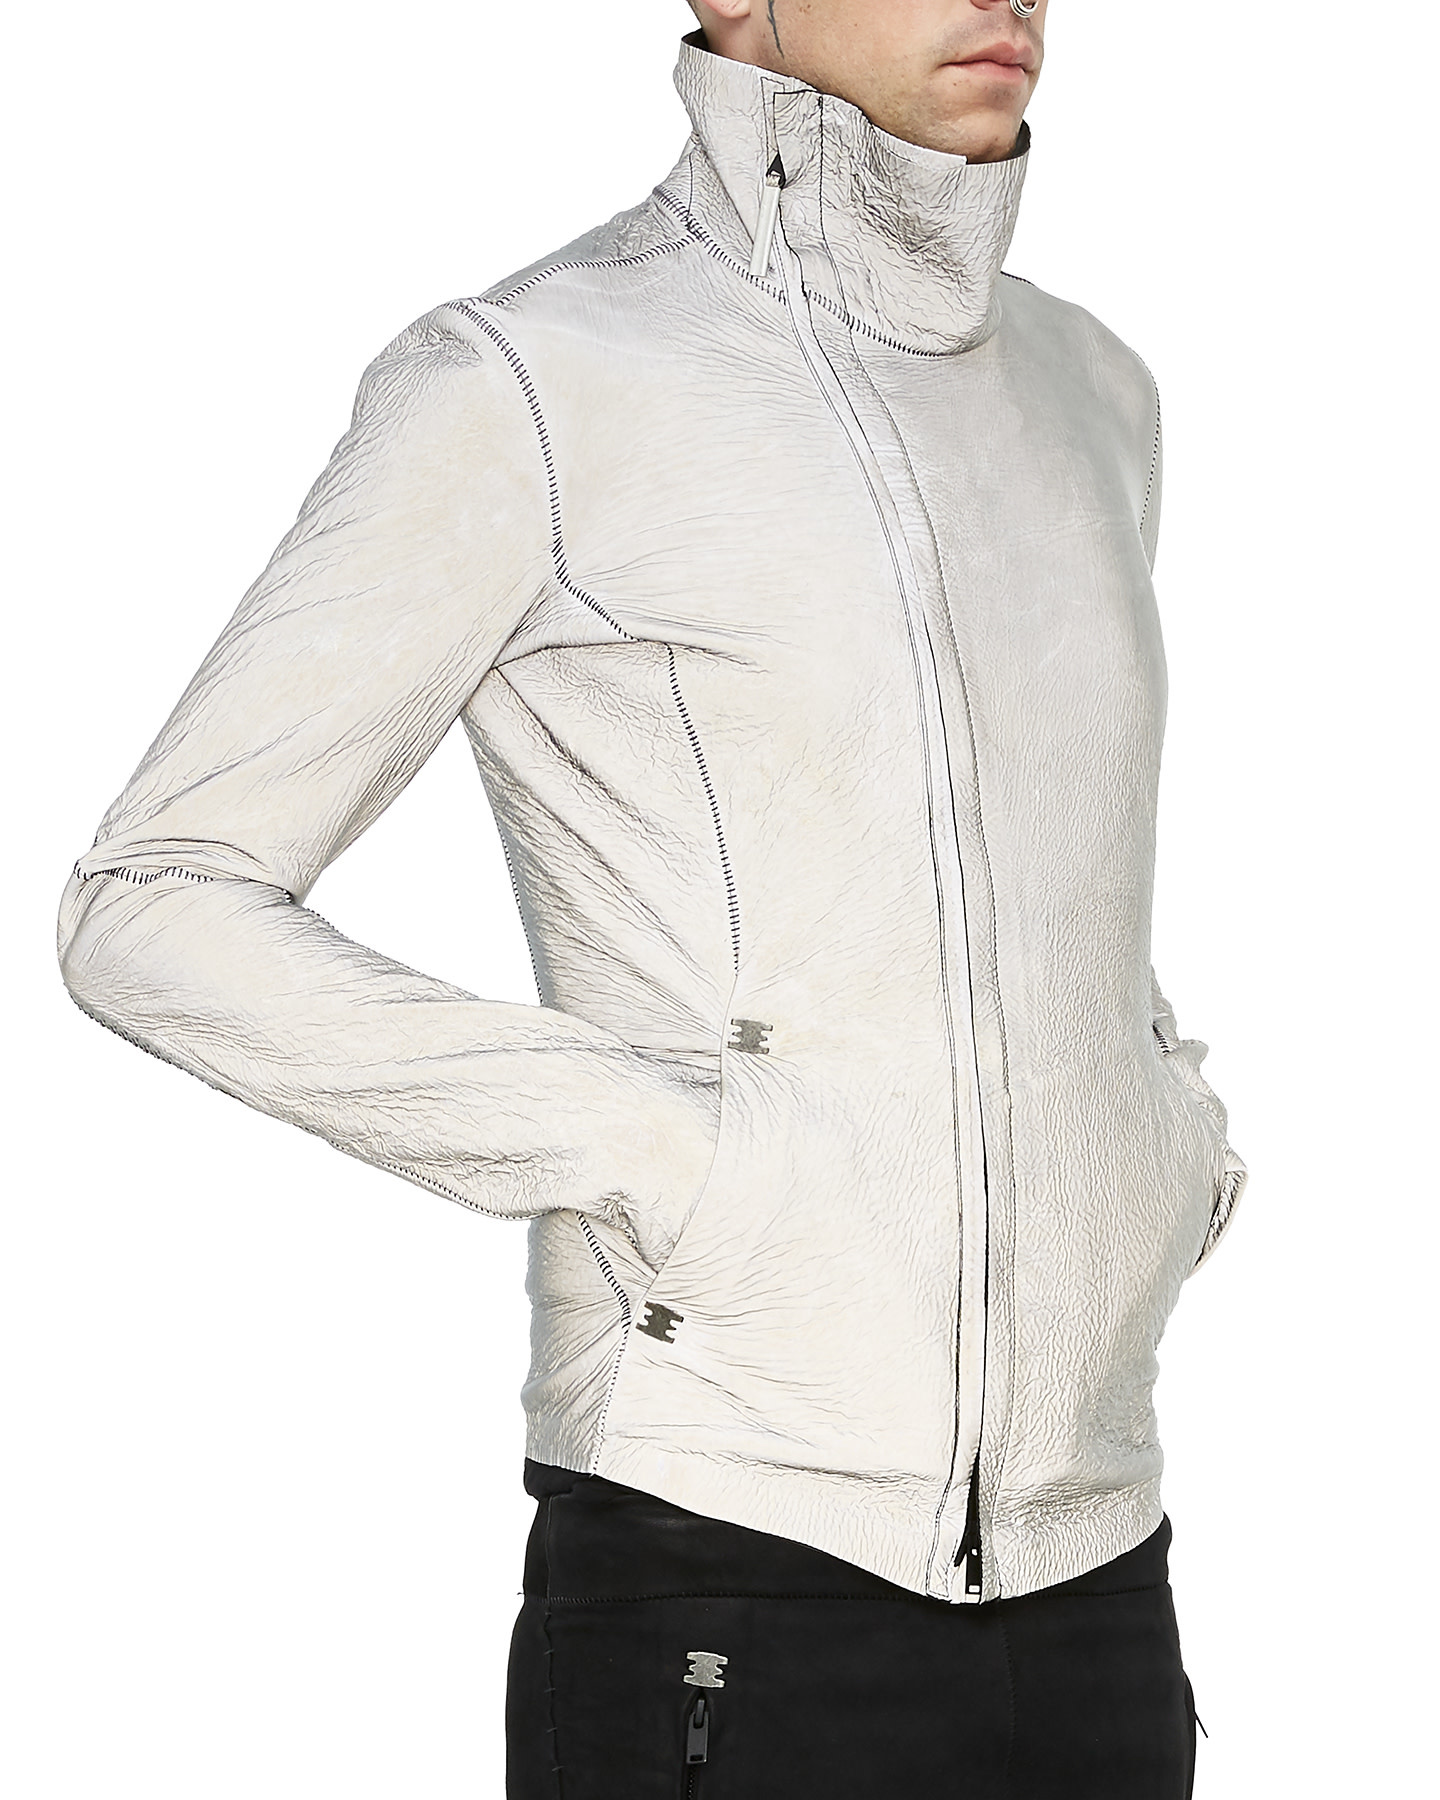 Imparable Reflective Leather Jacket By Isaac Sellam | Shop Untitled - Shop  Untitled NYC